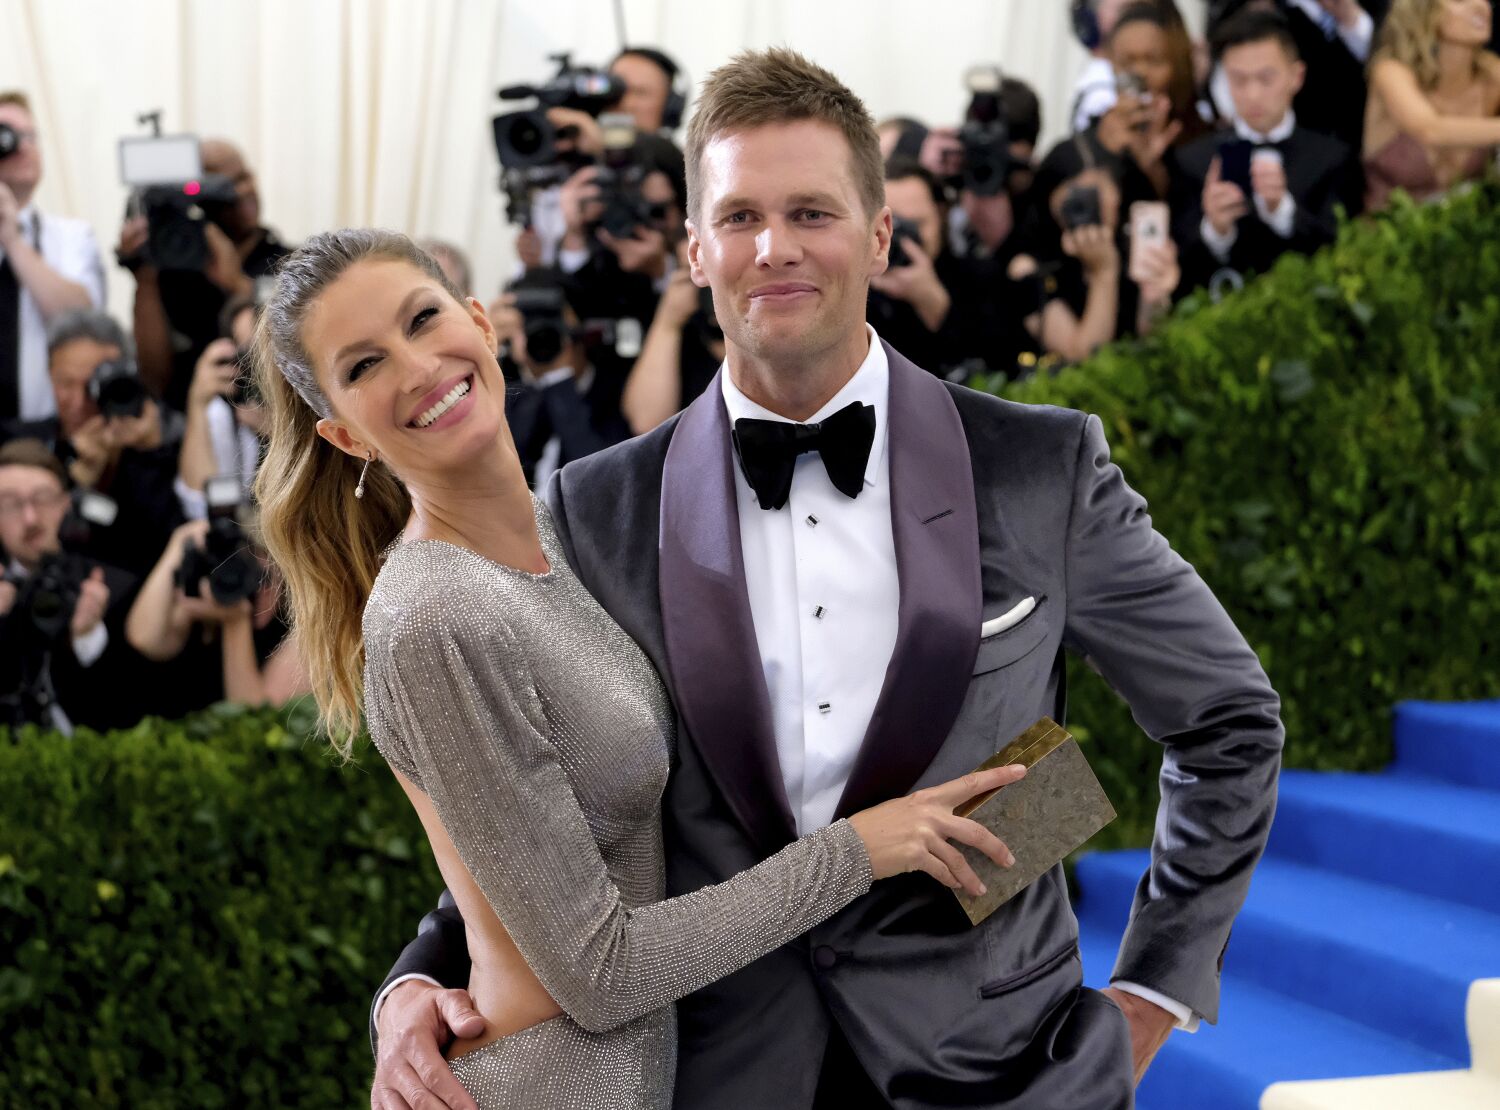 Months after their divorce, Gisele Bündchen weighs in on Tom Brady's decision to retire